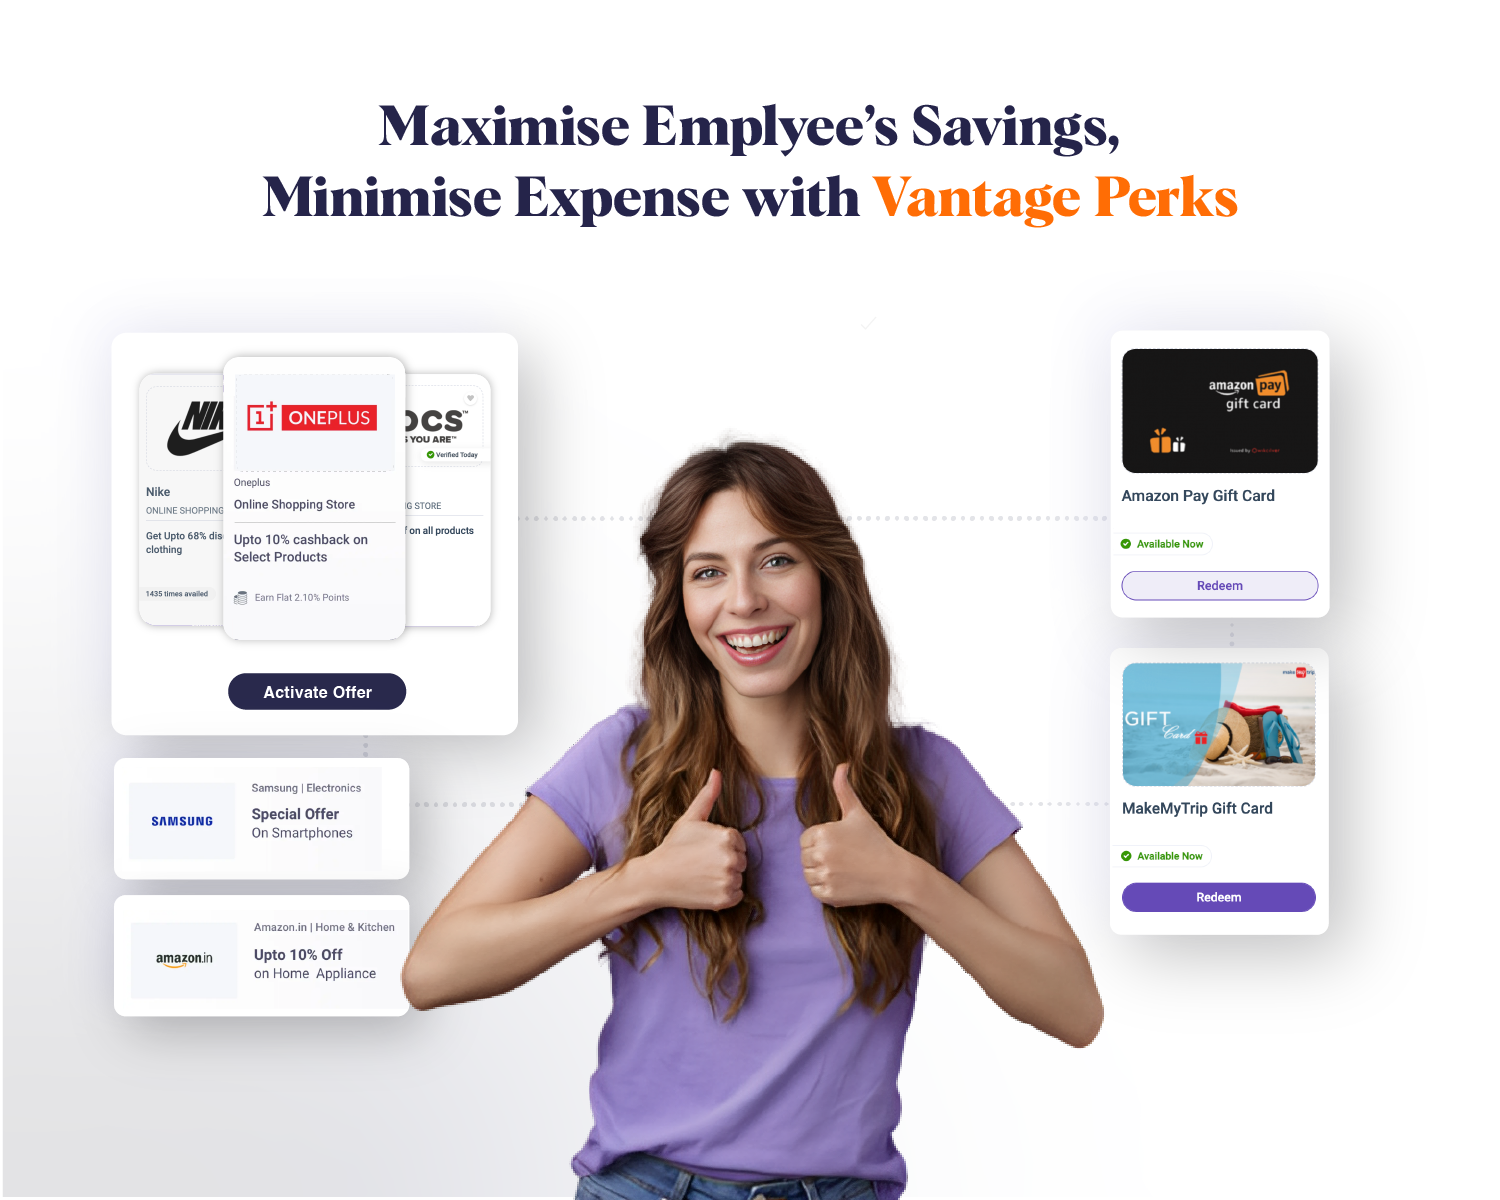 A comprehensive employee benefits program that saves your employees money by providing best deals with unbeatable perks and corporate discounts.